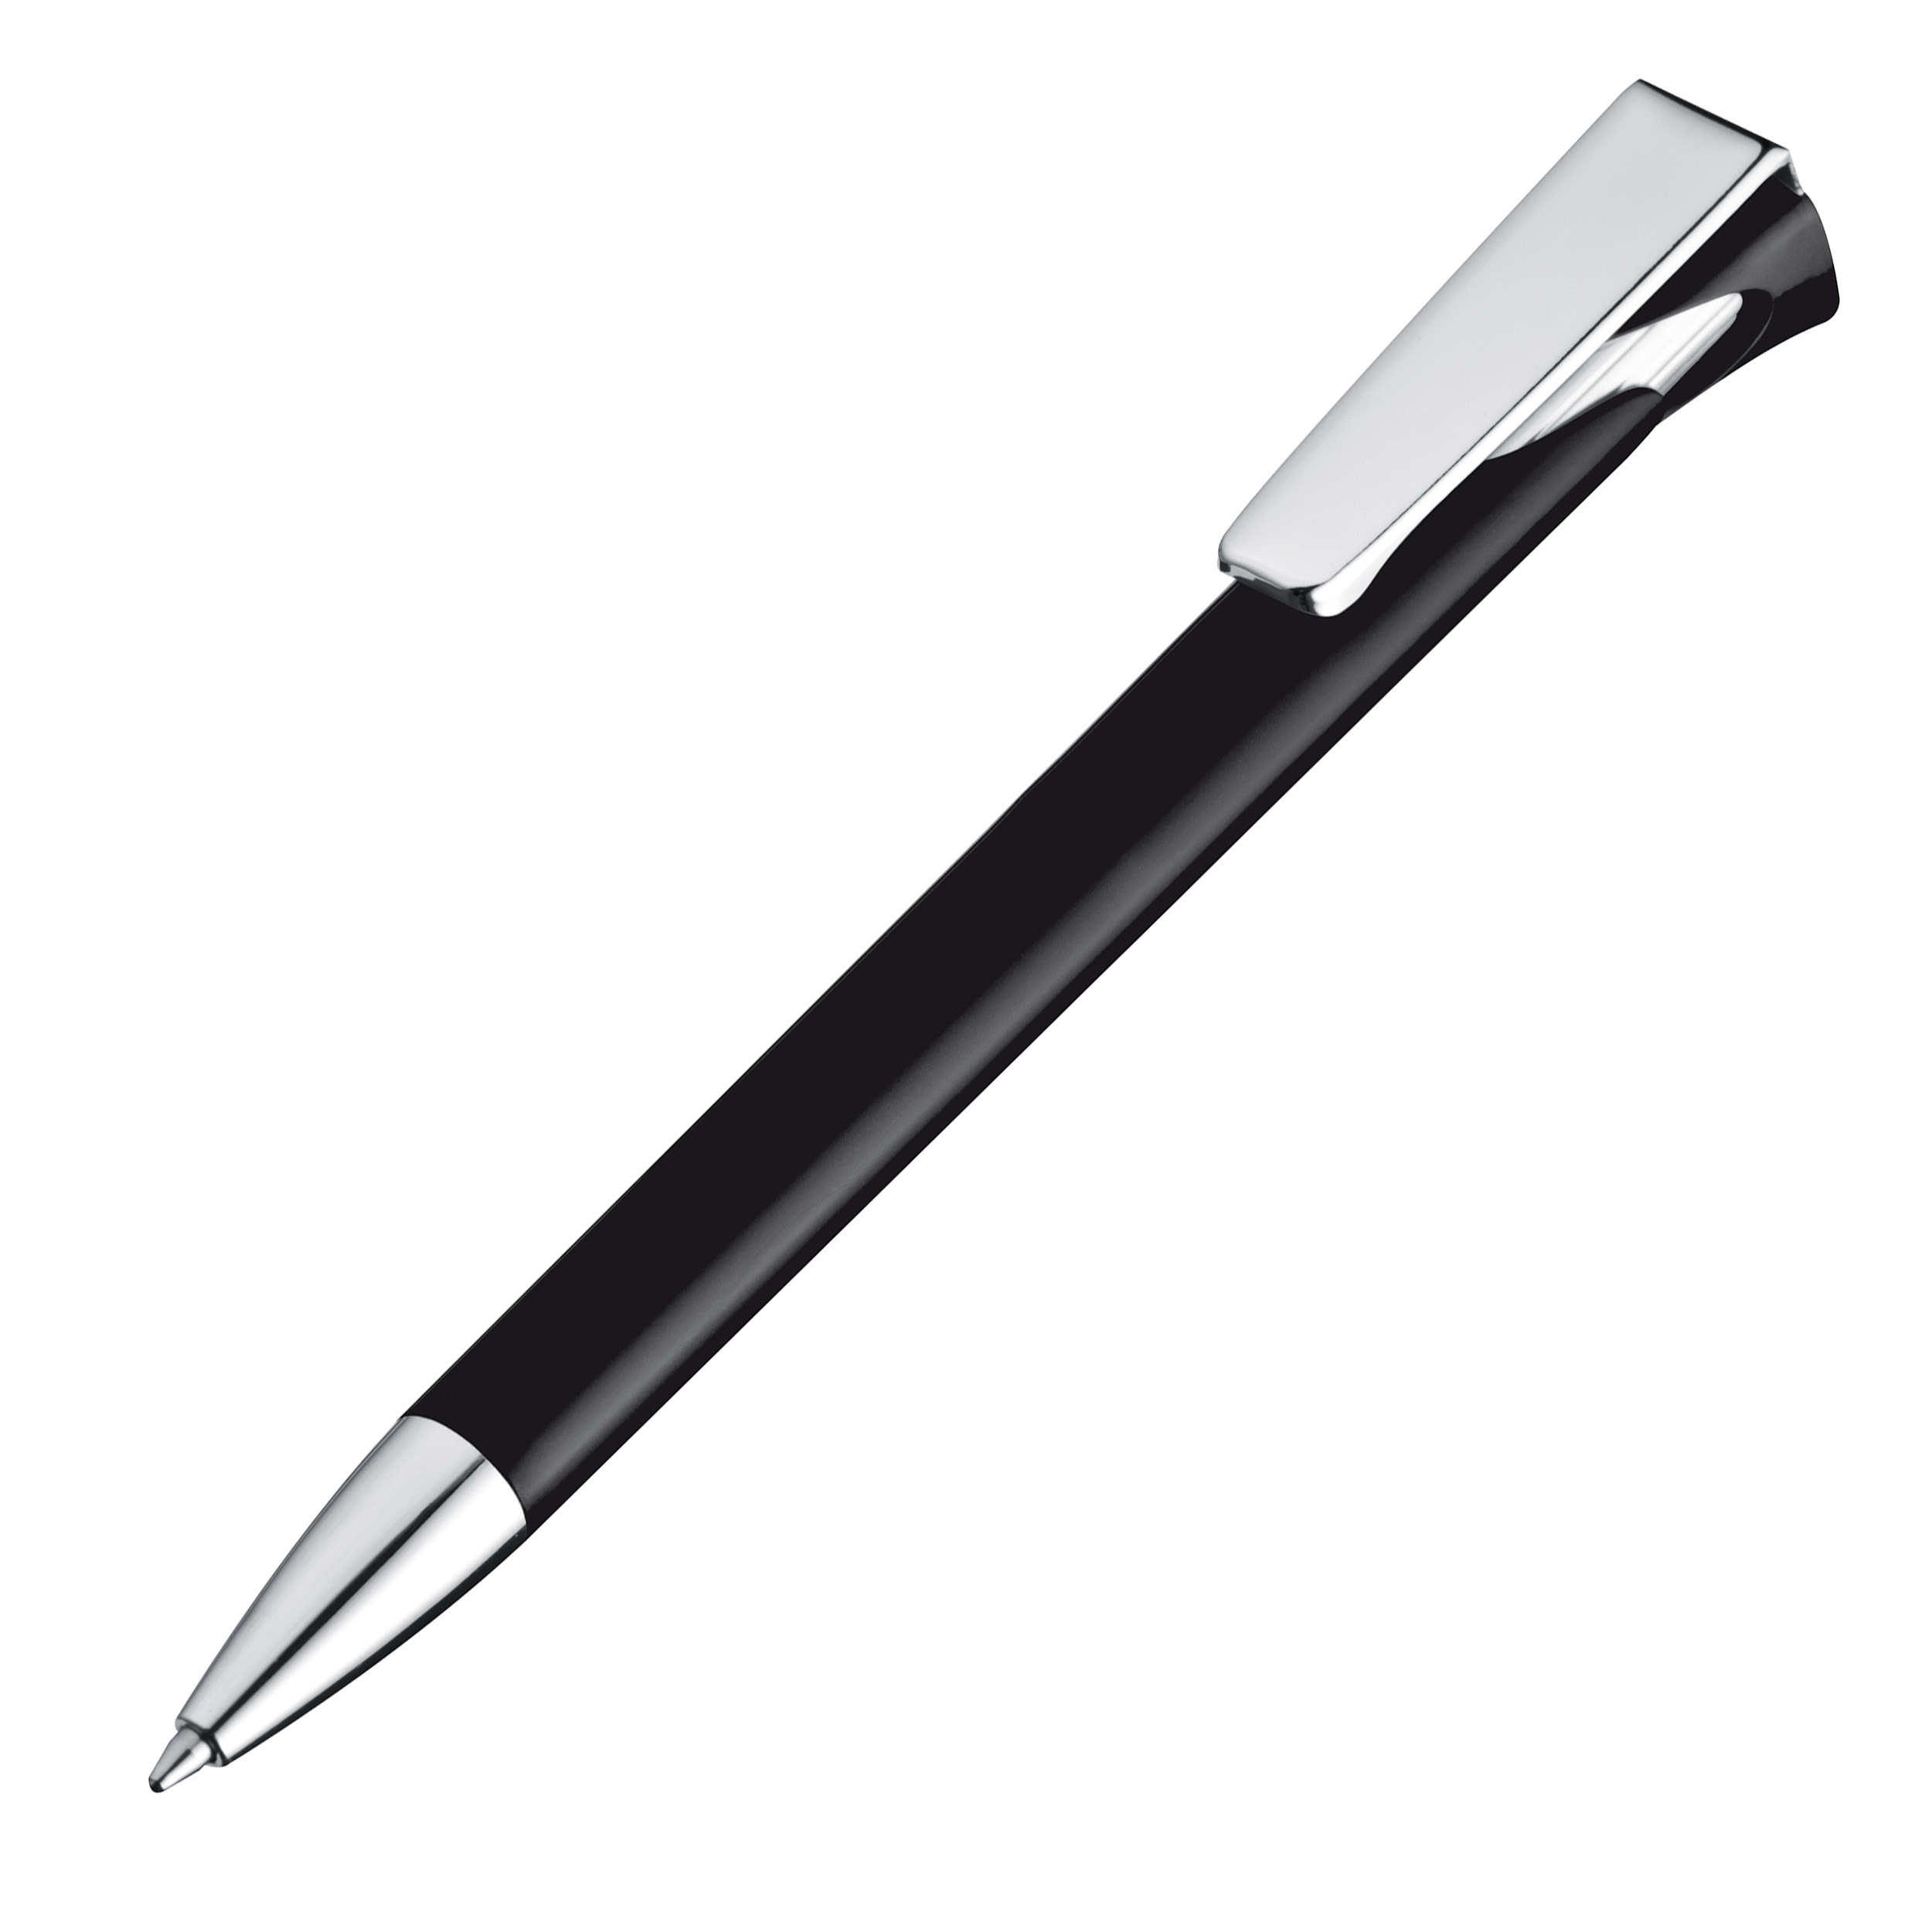 This is a plastic ballpoint pen with a logo print from Woodmancote. - Kilmarnock